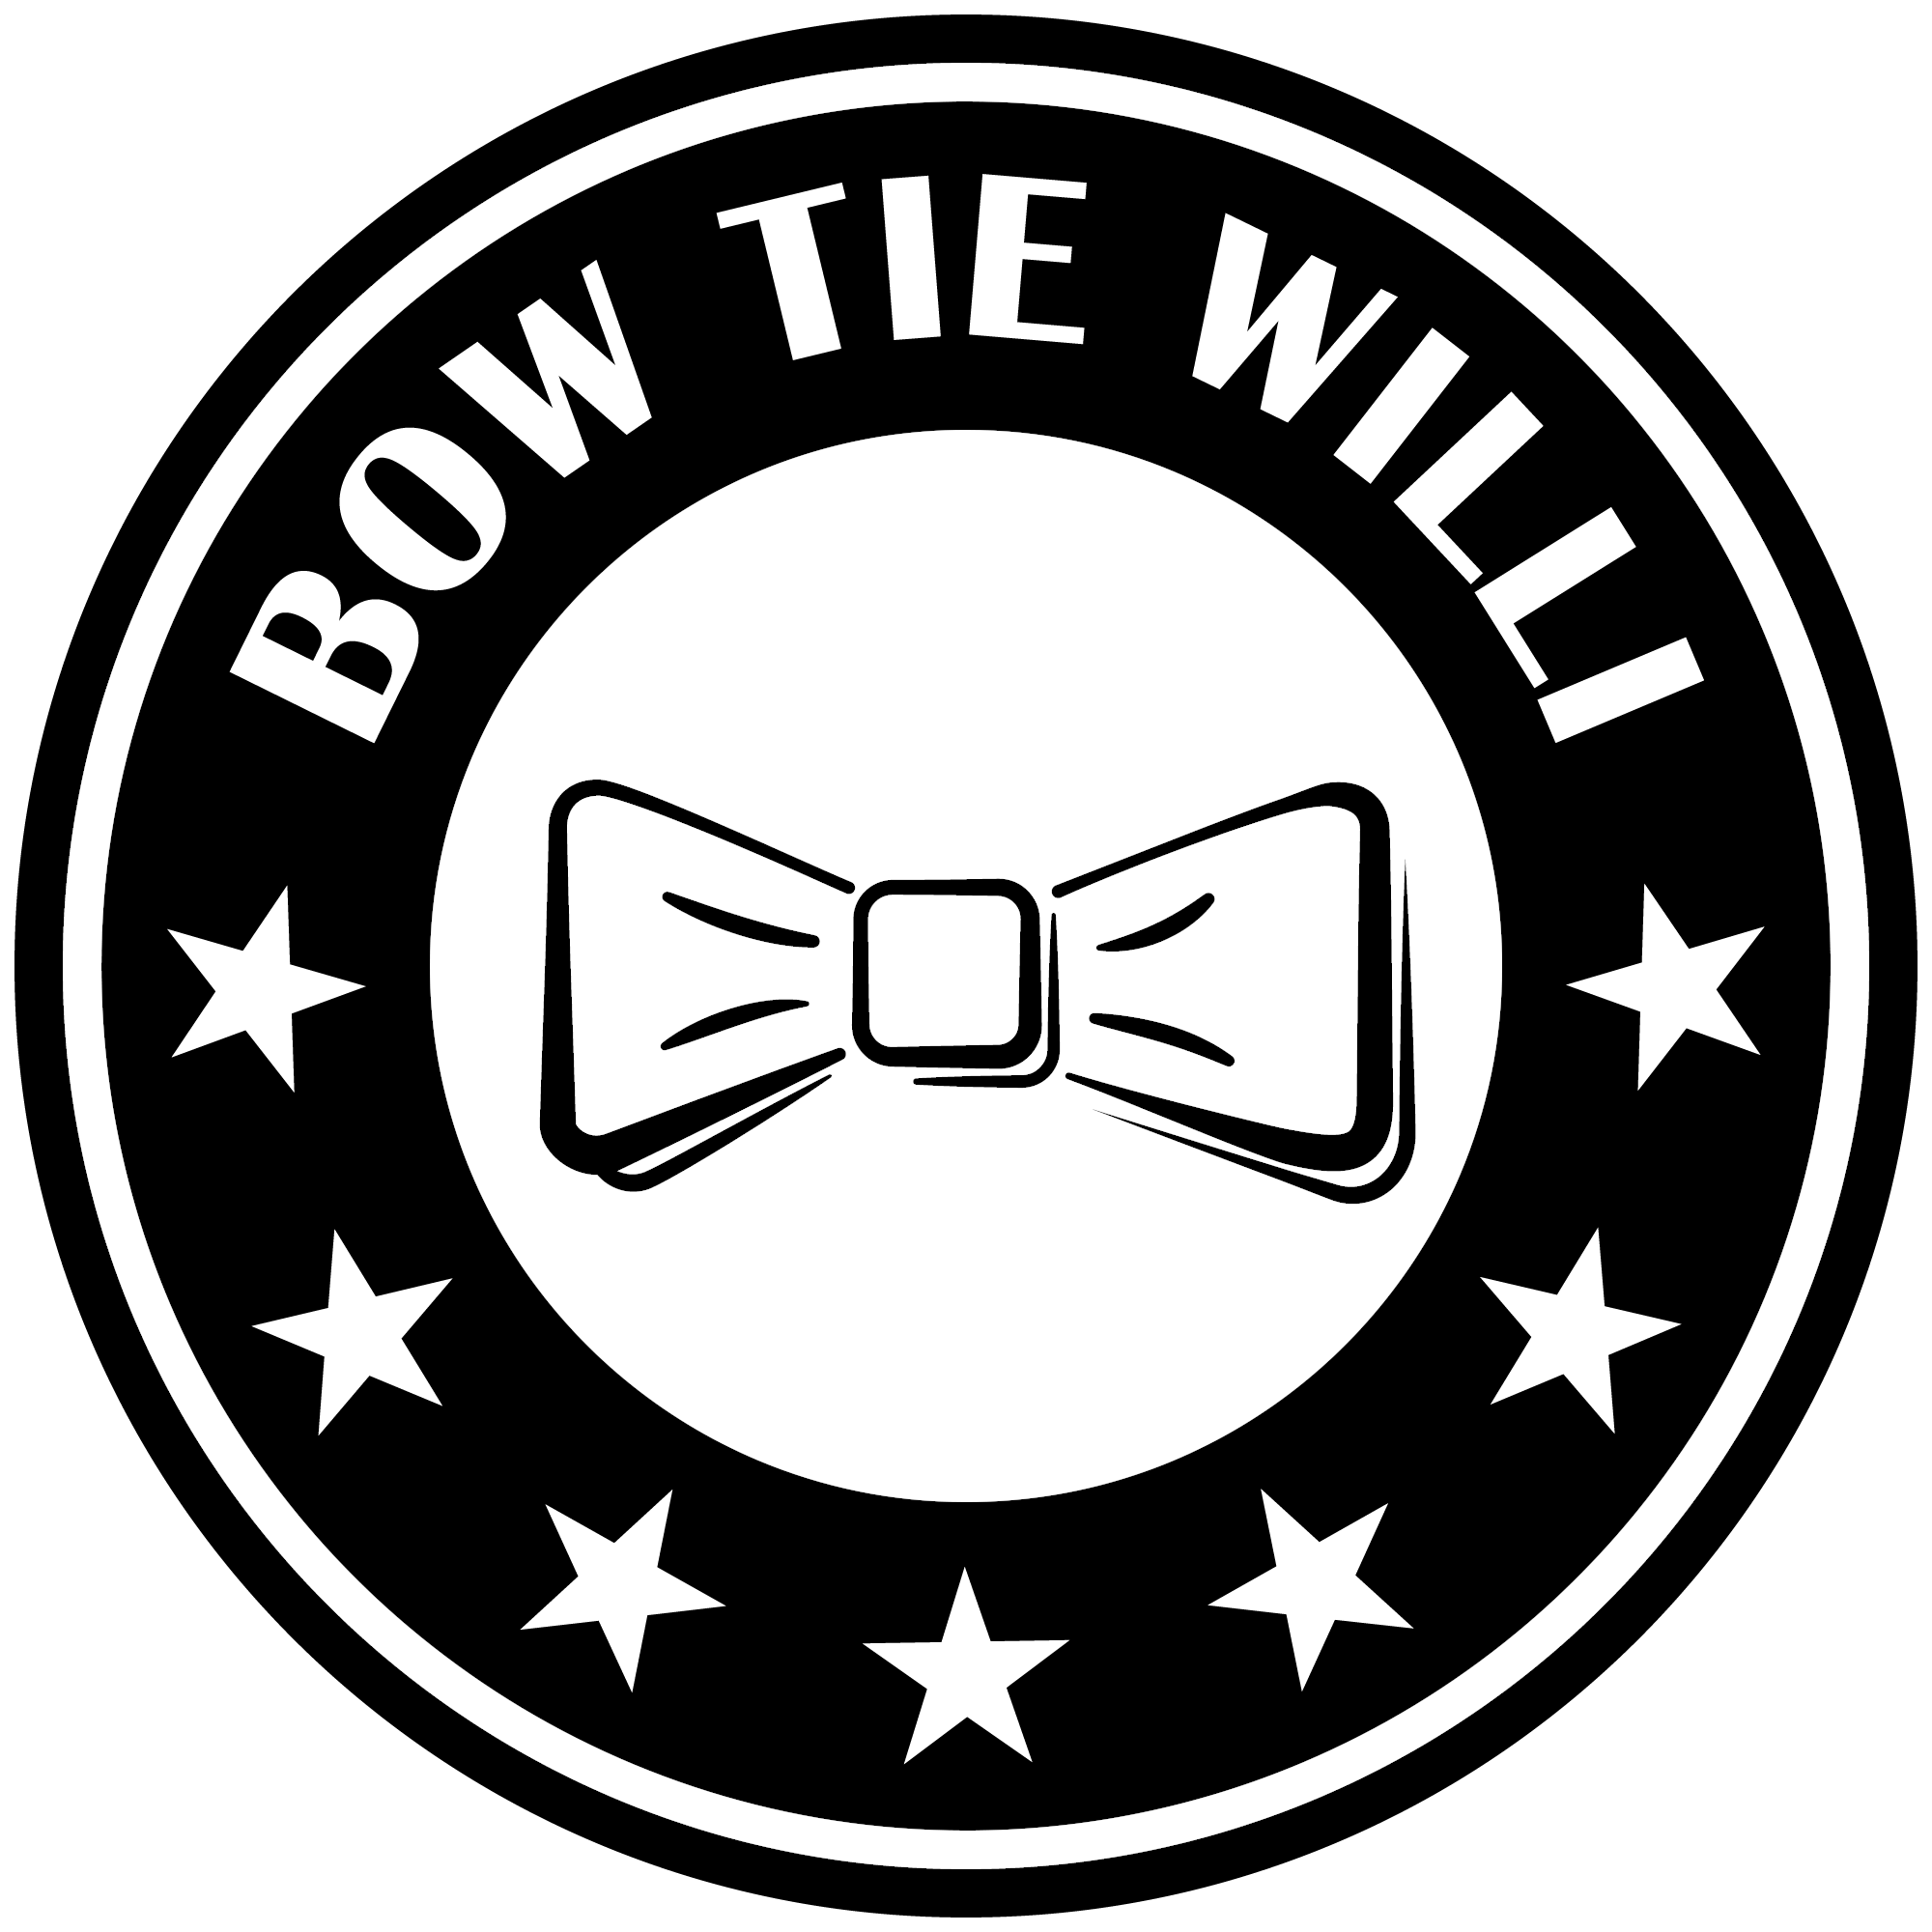 Bow tie willie Live Session 20.05.2020